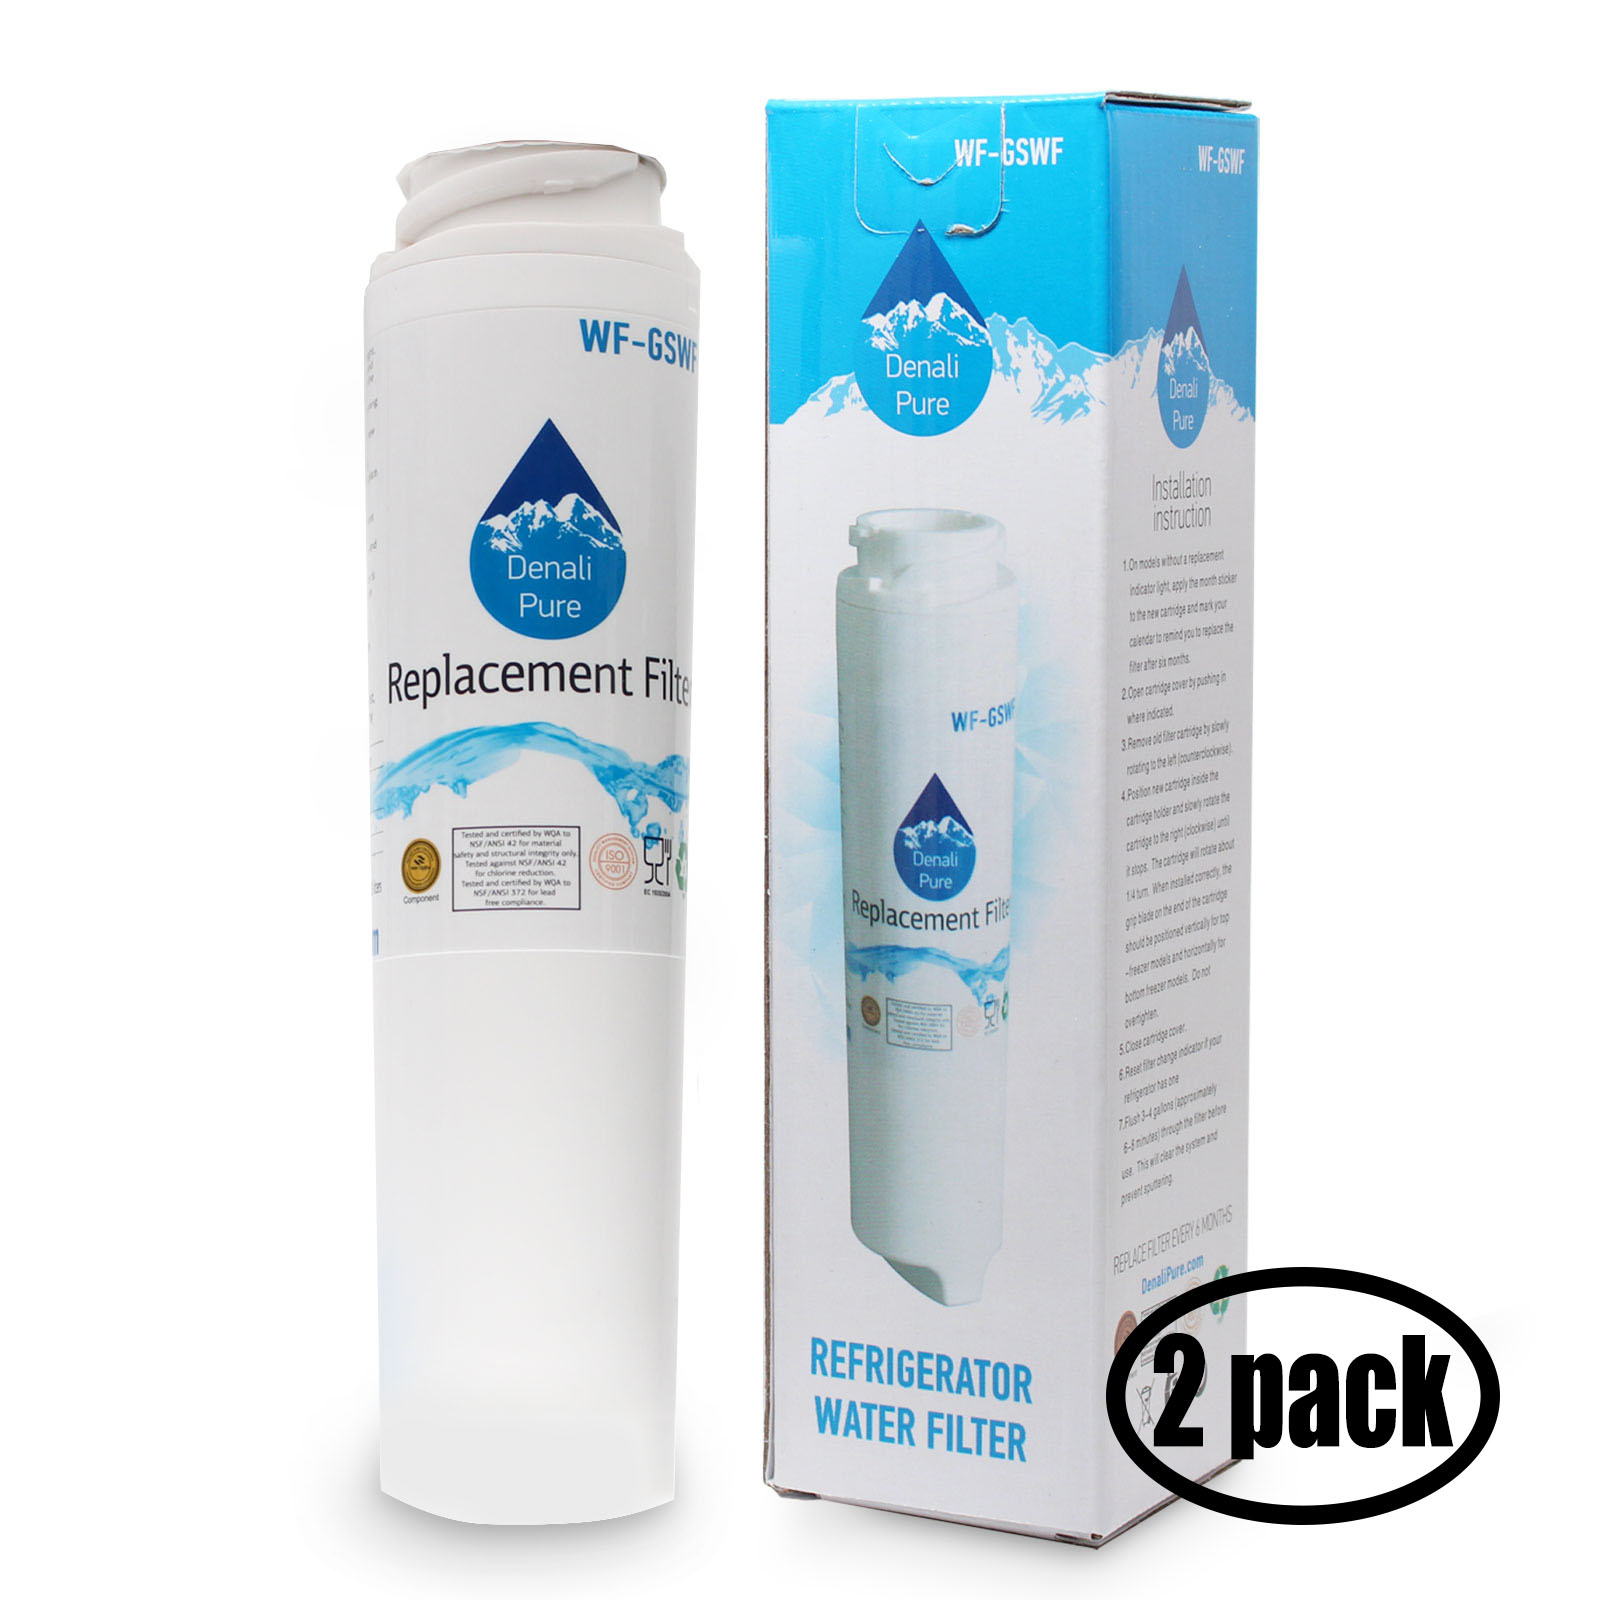 2-Pack Replacement for General Electric 238C2334P001 Refrigerator Water Filter - Compatible with General Electric 238C2334P001 Fridge Water Filter Cartridge - image 1 of 4